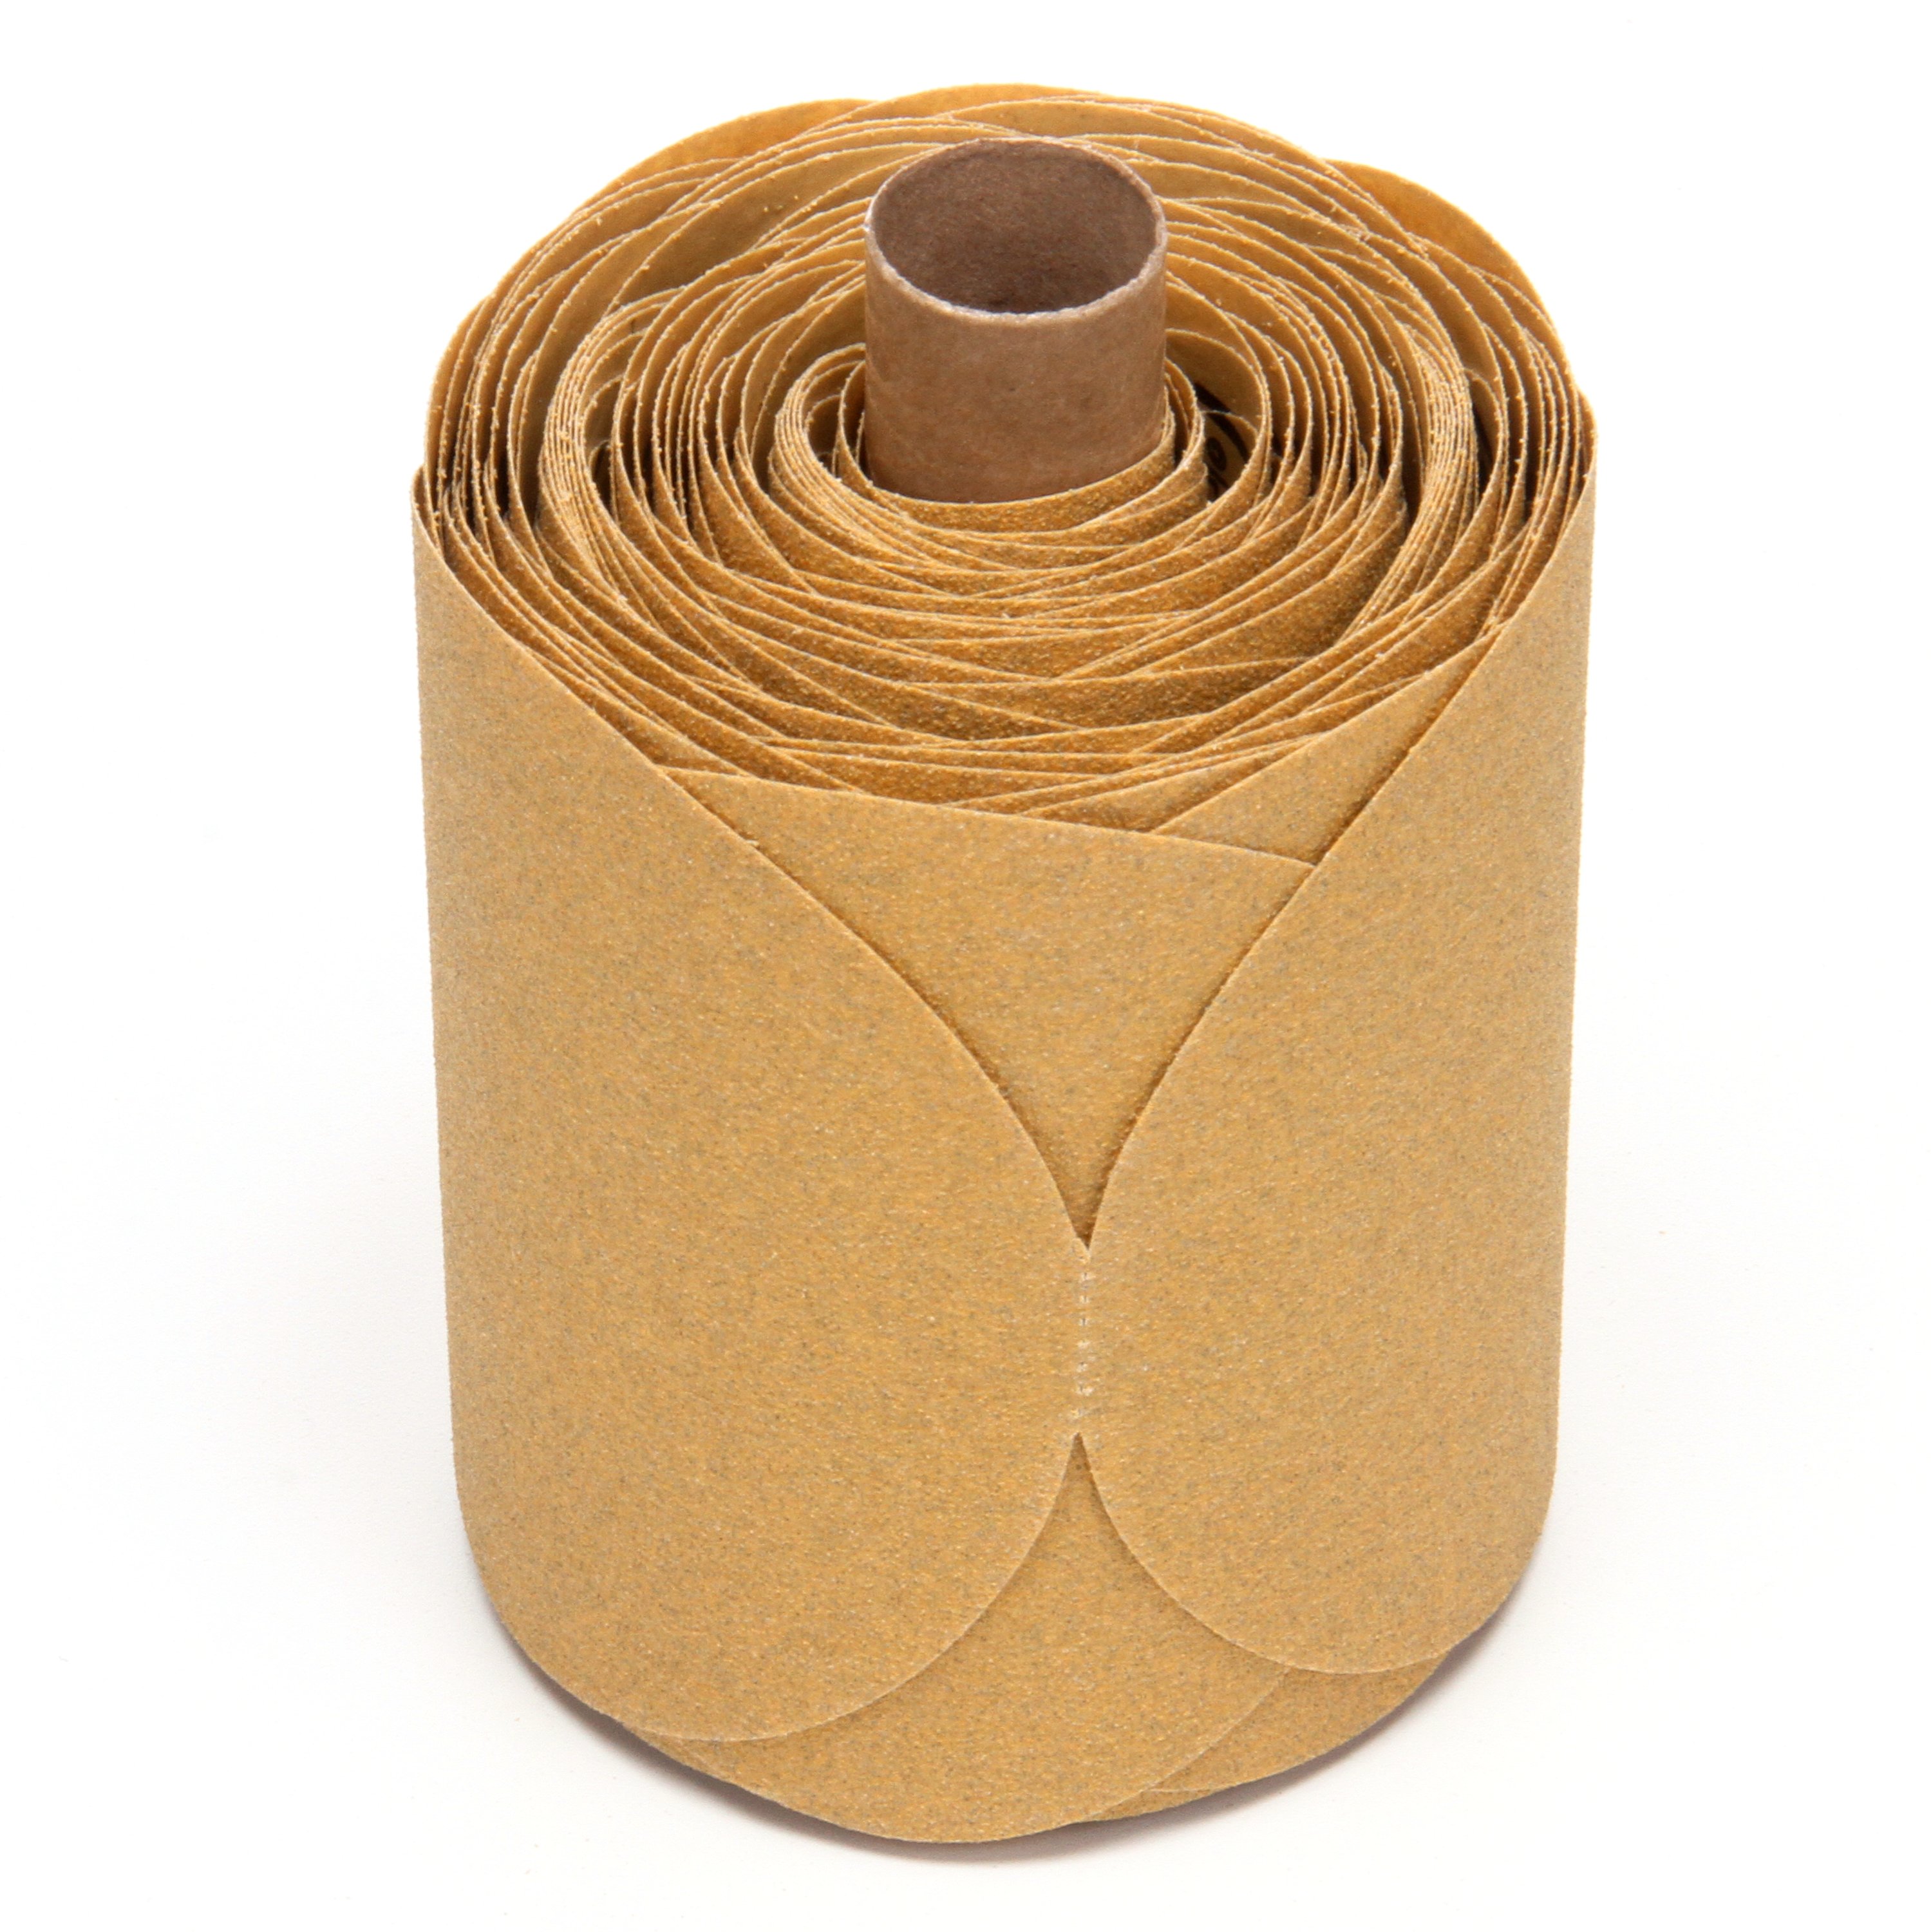 3M™ Stikit™ disc rolls are multiple adhesive-backed abrasive discs rolled onto a core